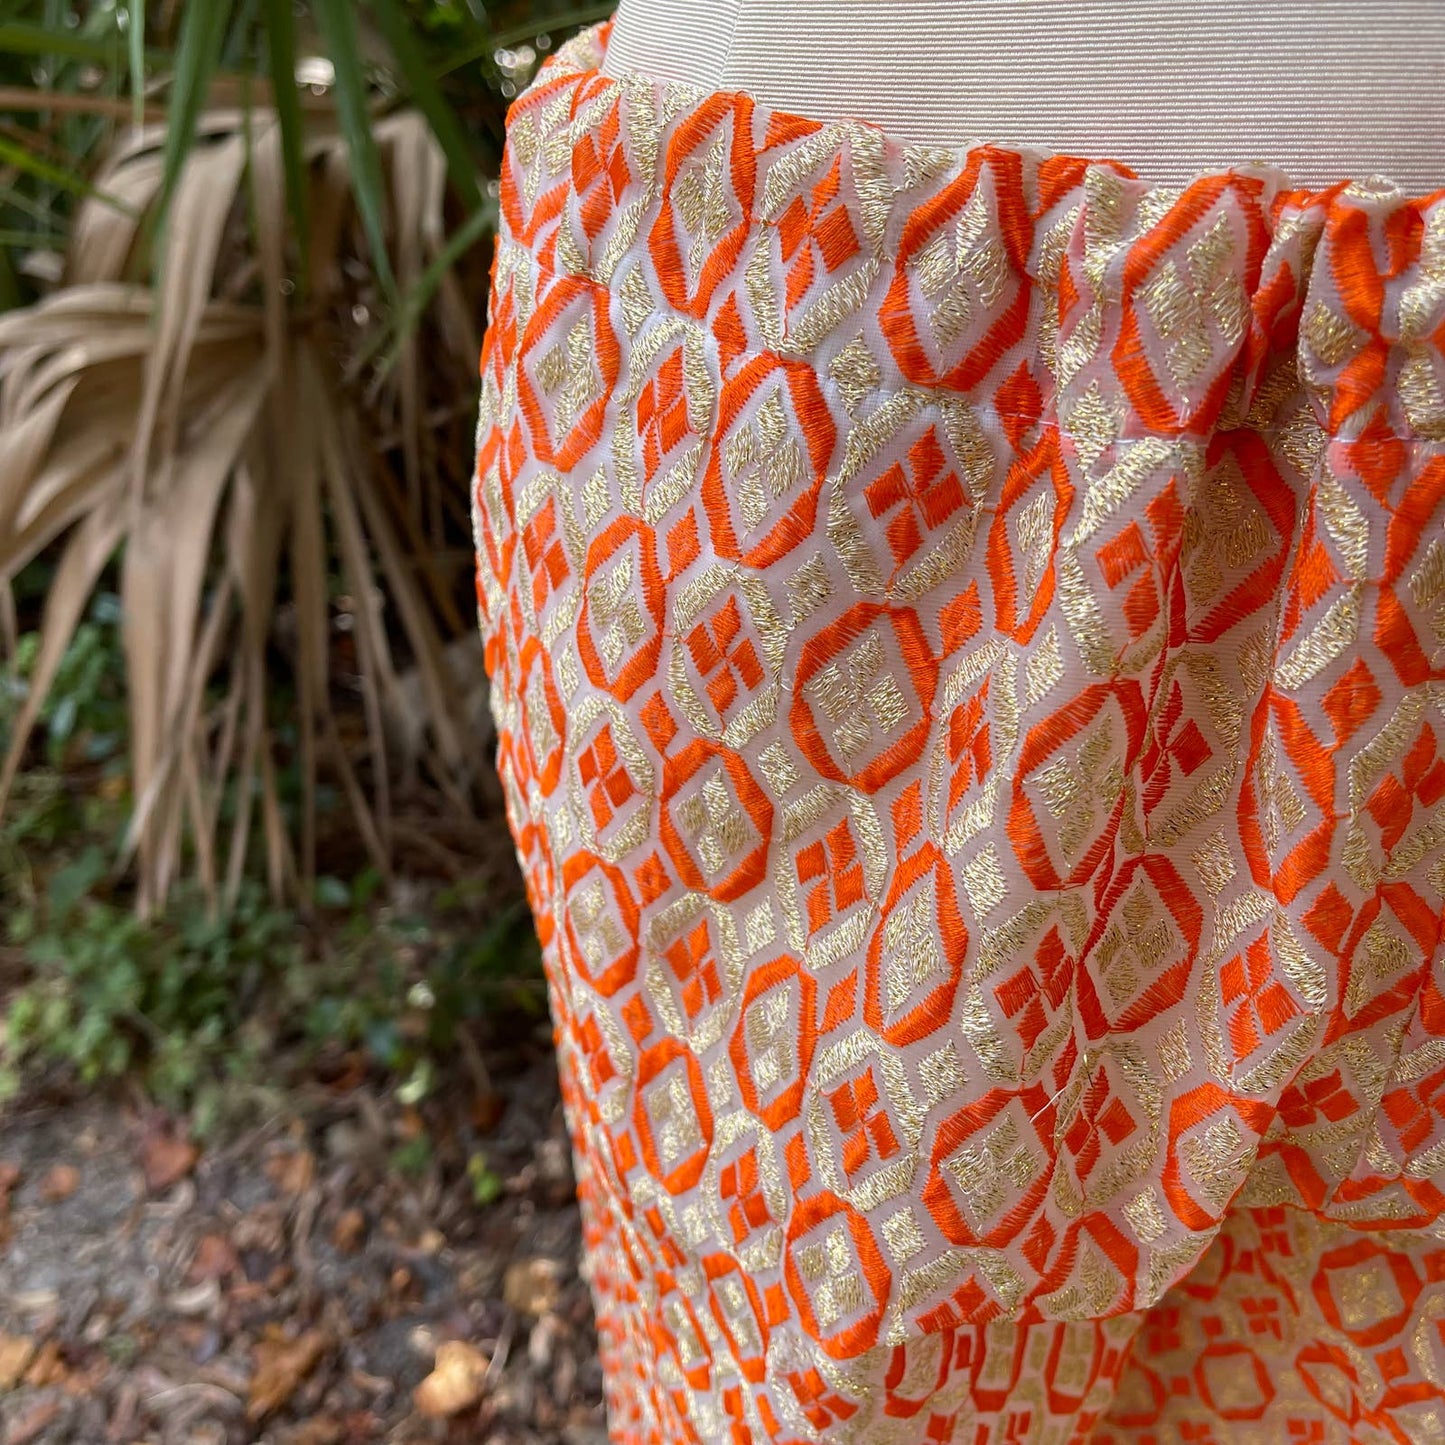 Sheer Gold and Orange Geometric Embroidered Pants Mod Look Size L XL